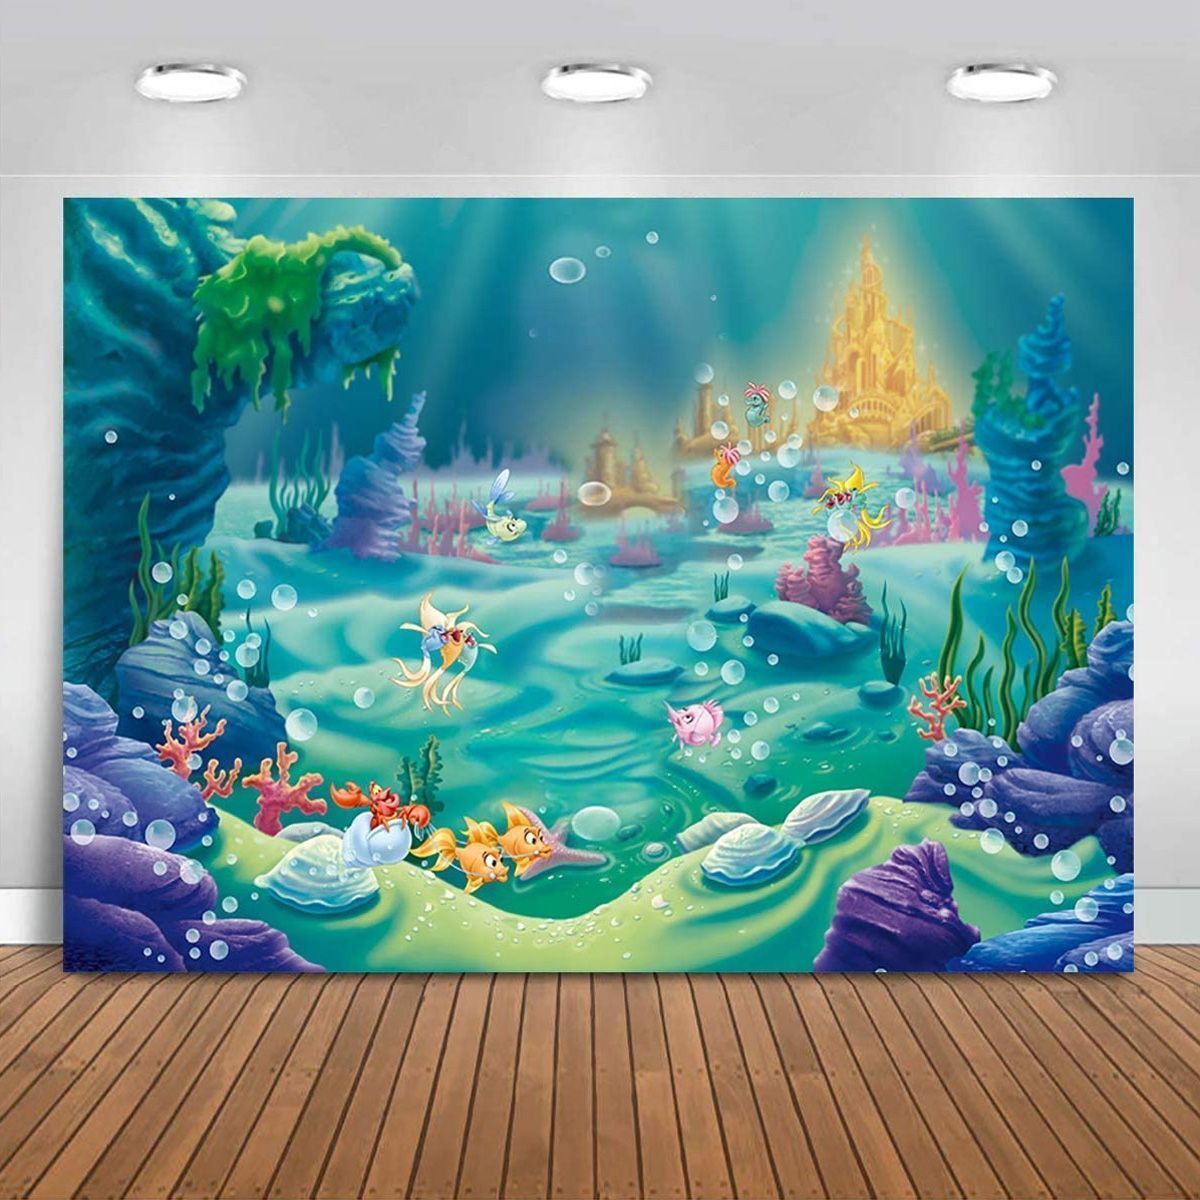 5x3FT-7x5FT-9x6FT-Underwater-Castle-Fish-Studio-Photography-Backdrops-Background-1680239